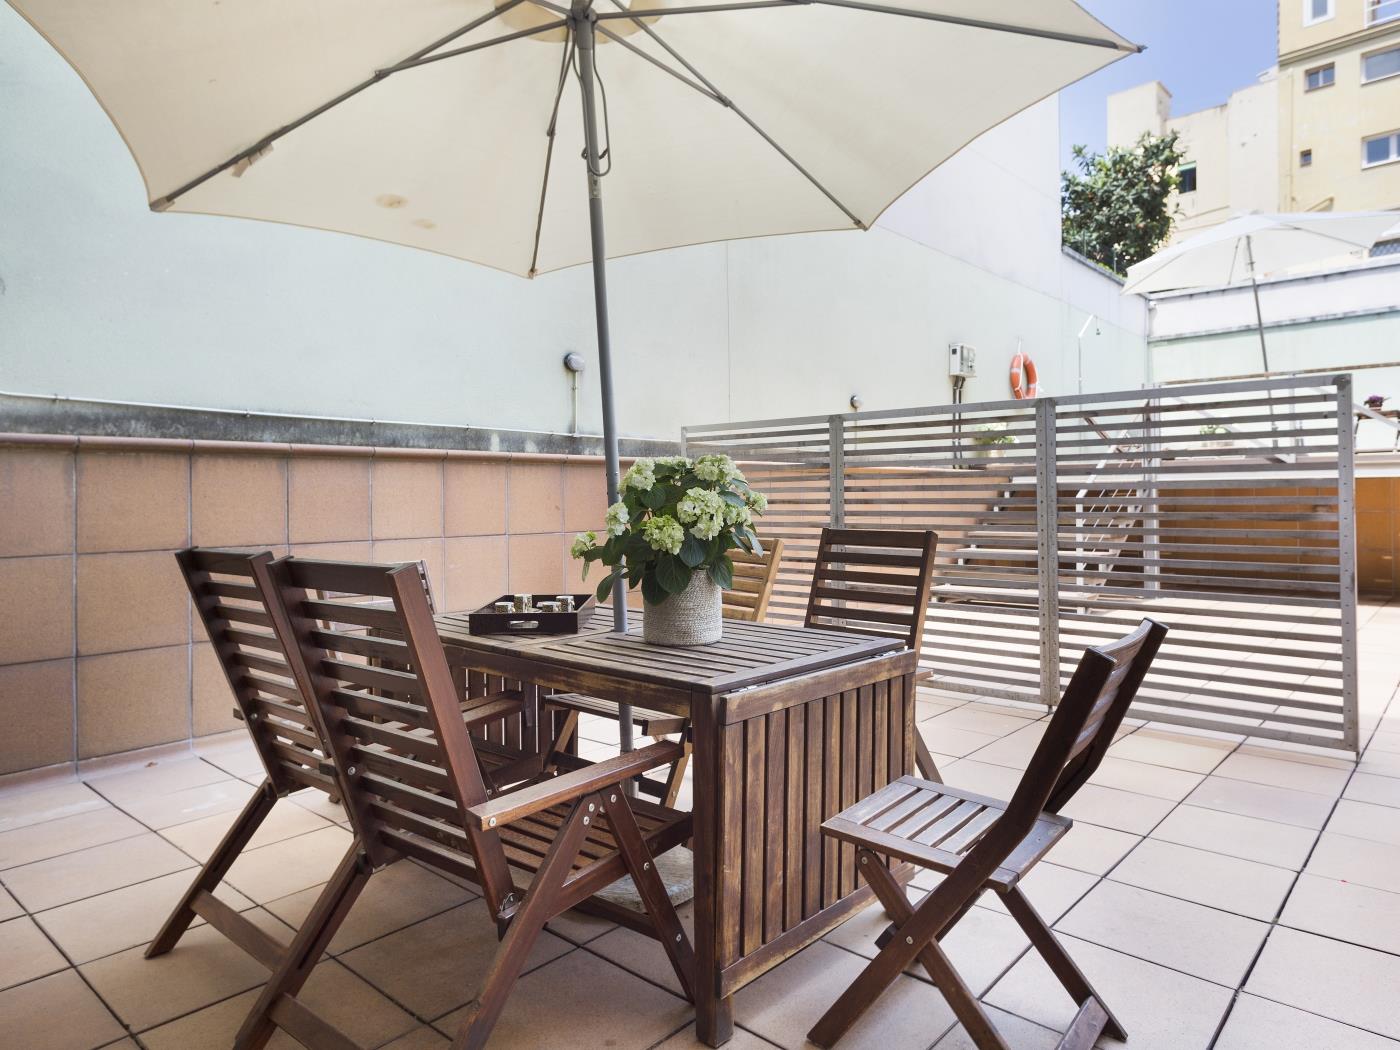 Terrace and pool apartment near the Barcelona centre - My Space Barcelona Aпартаменты